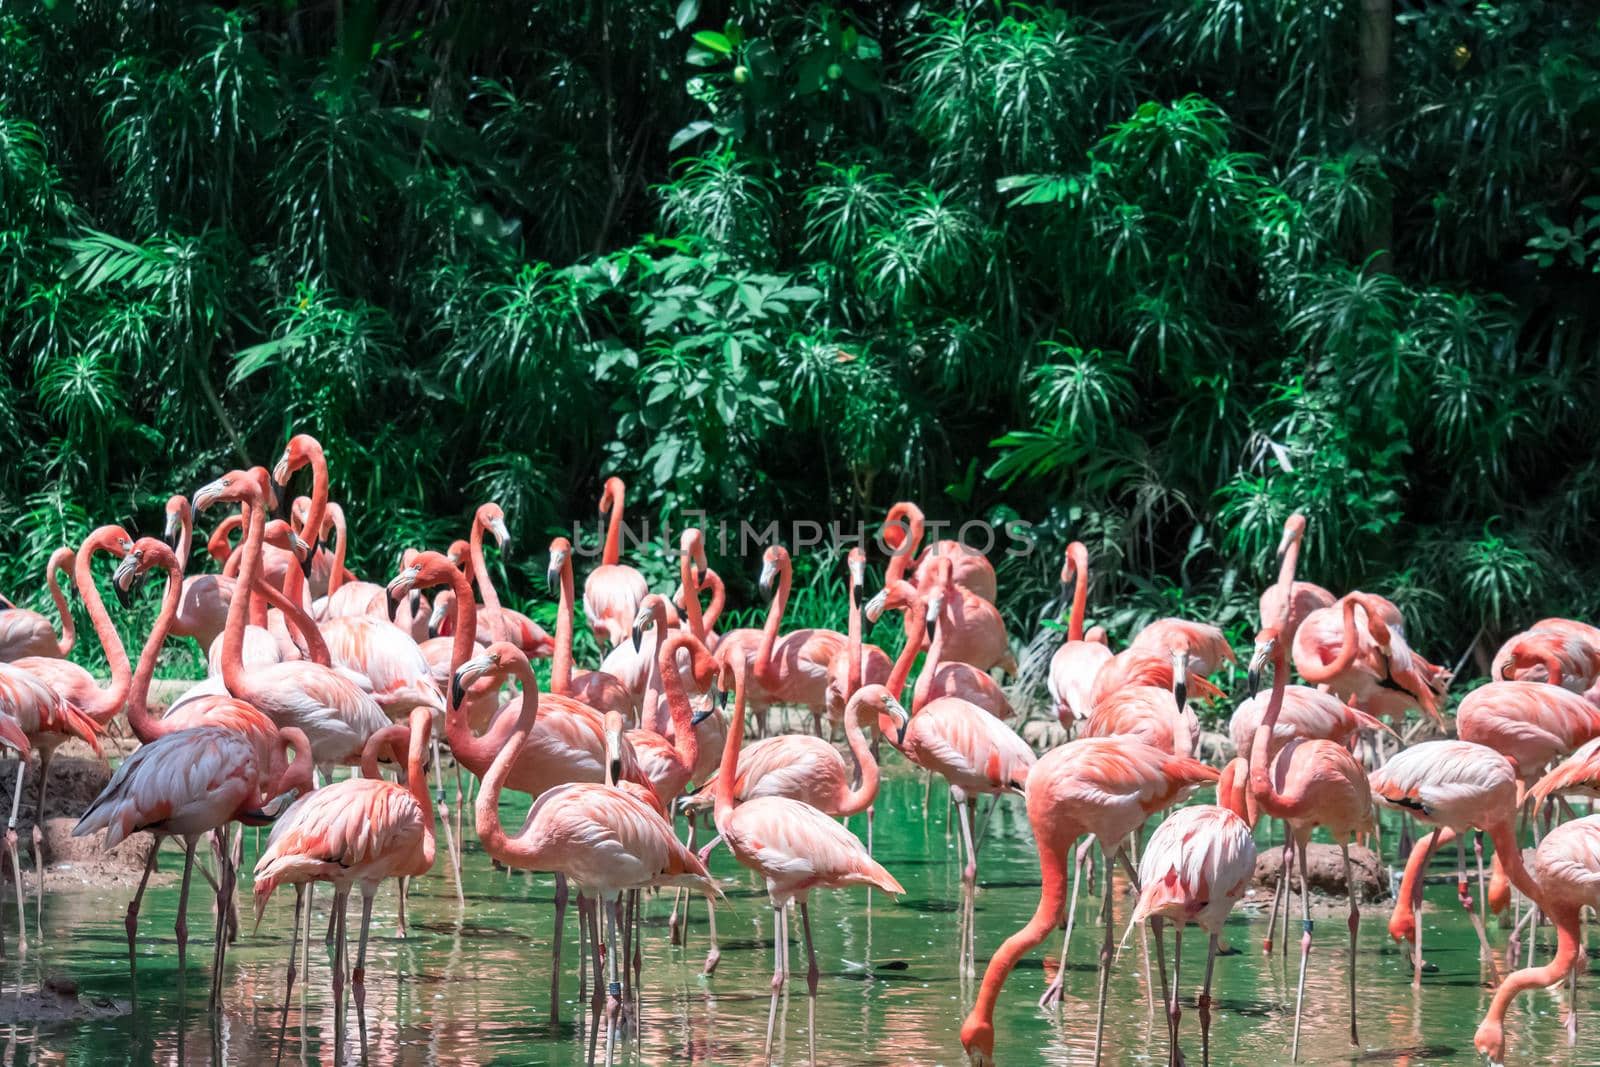 A Flock of Pink Caribbean flamingos in water